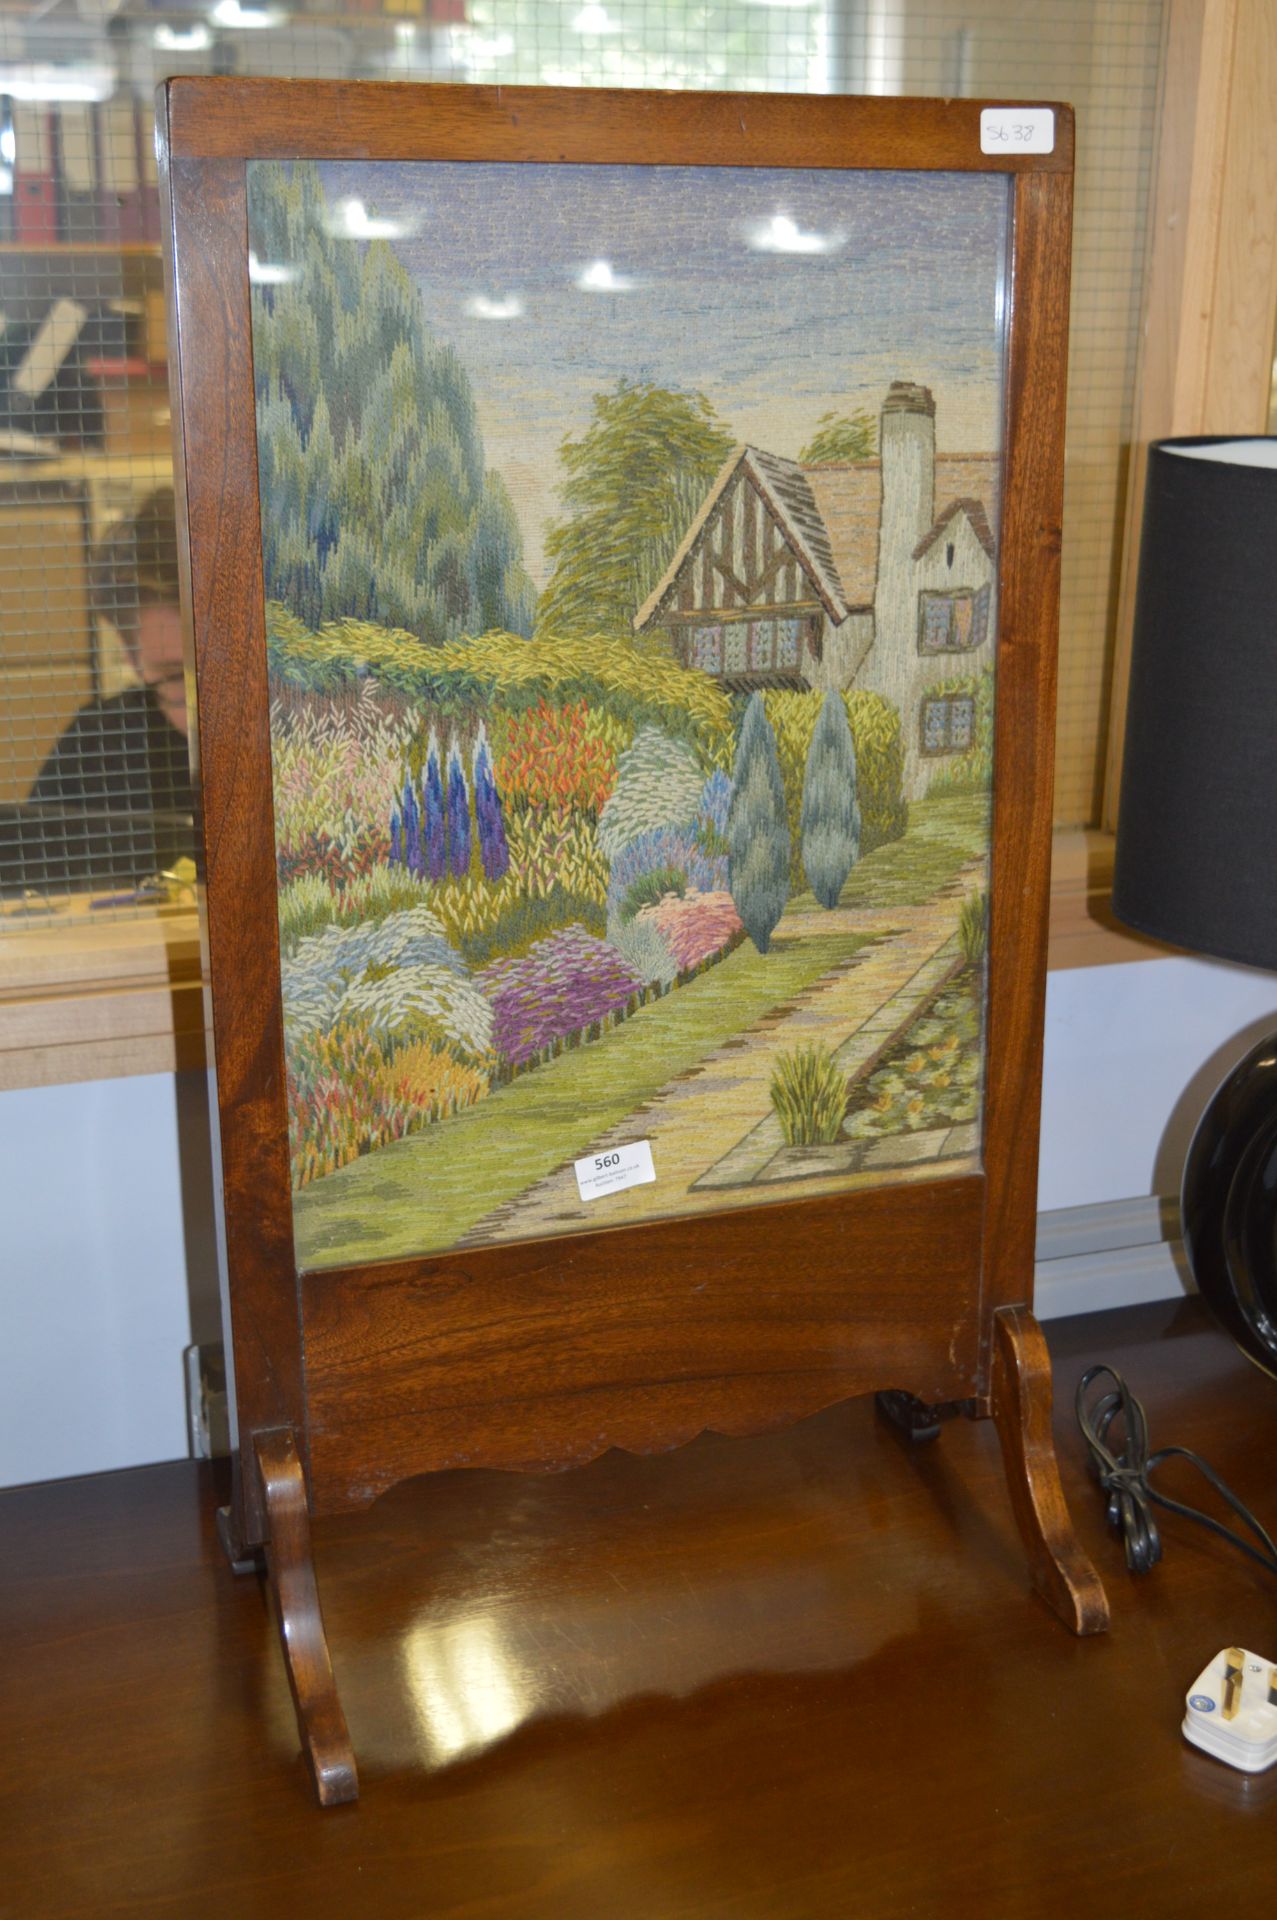 Mahogany Framed Fire Screen with Needle Work Panel